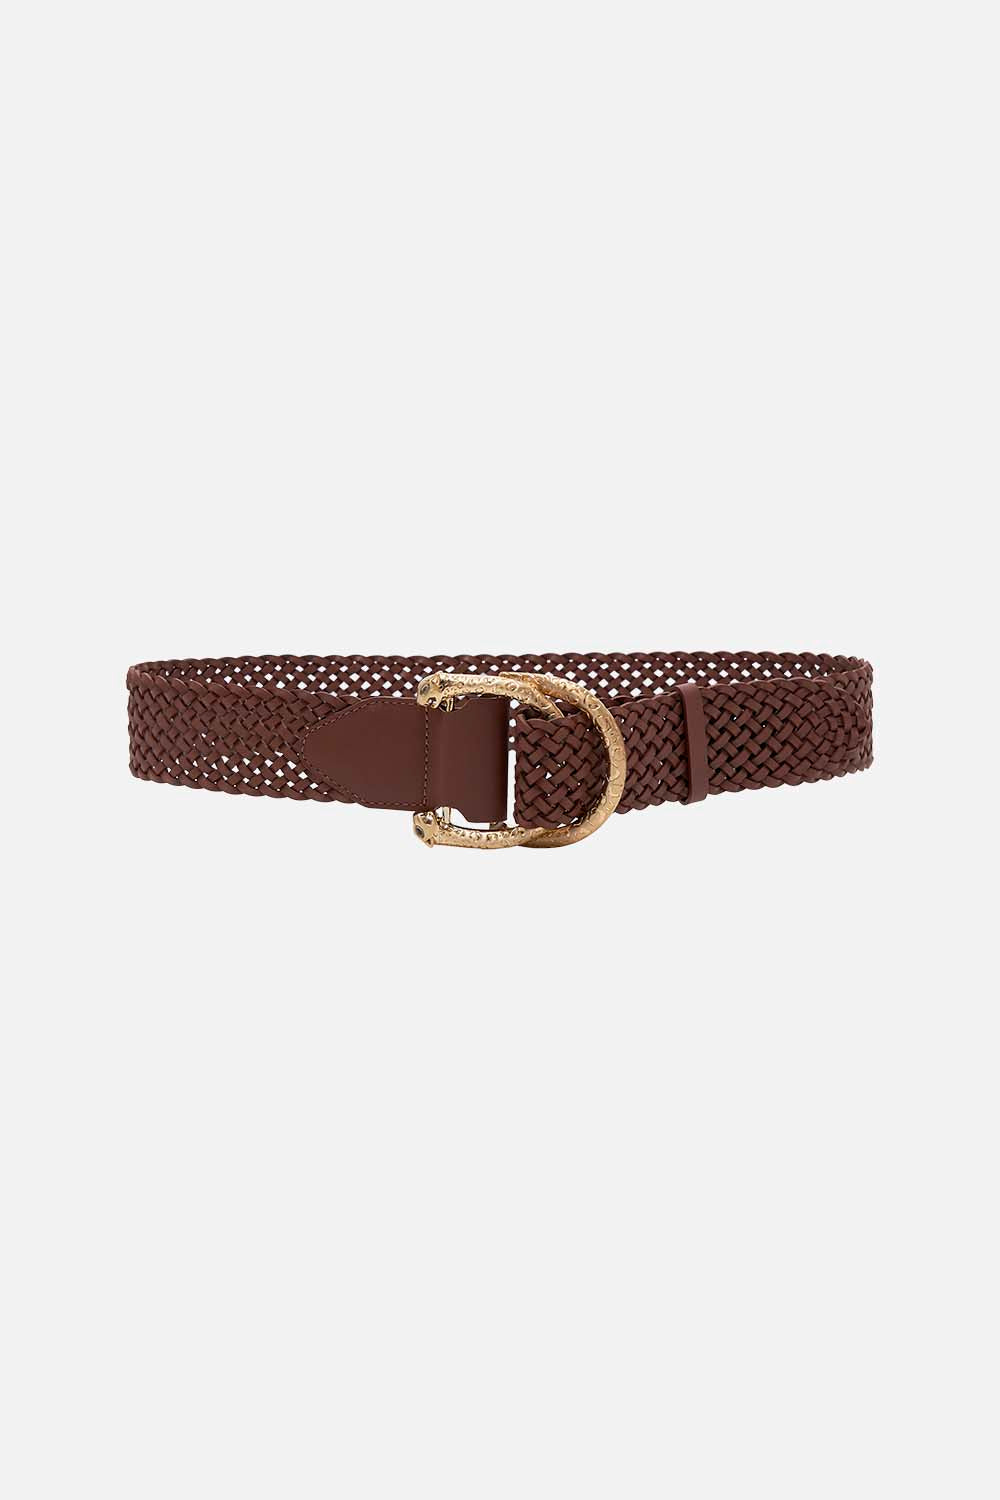 Product view of CAMILLA double D ring leather belt in tan 